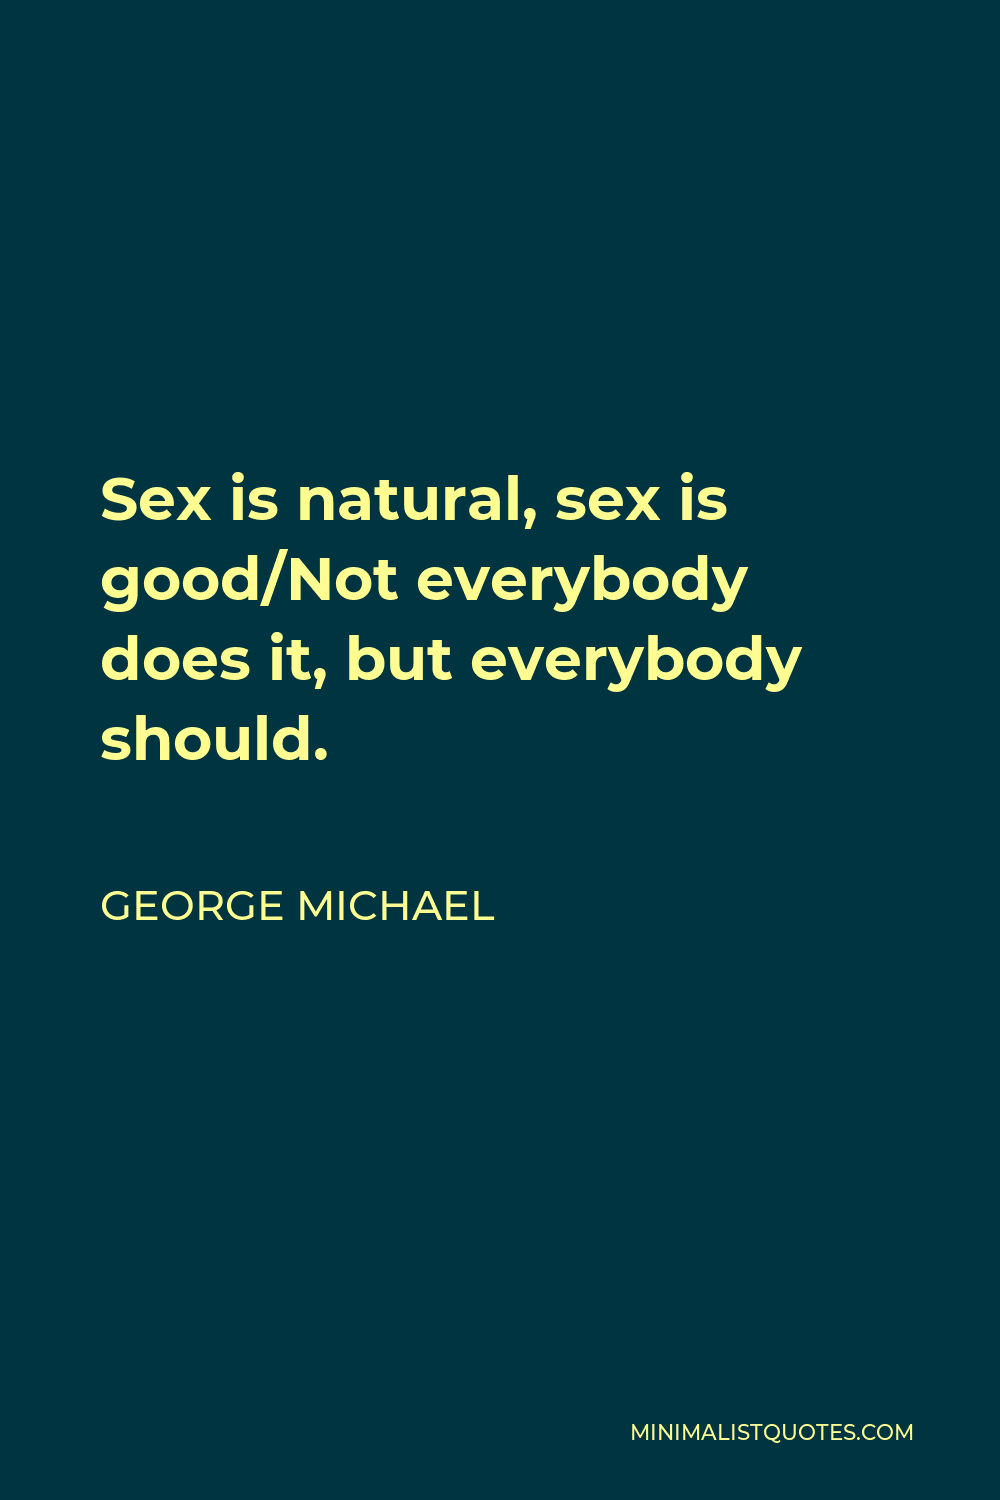 George Michael Quote - Sex is natural, sex is good/Not everybody does it, but everybody should.